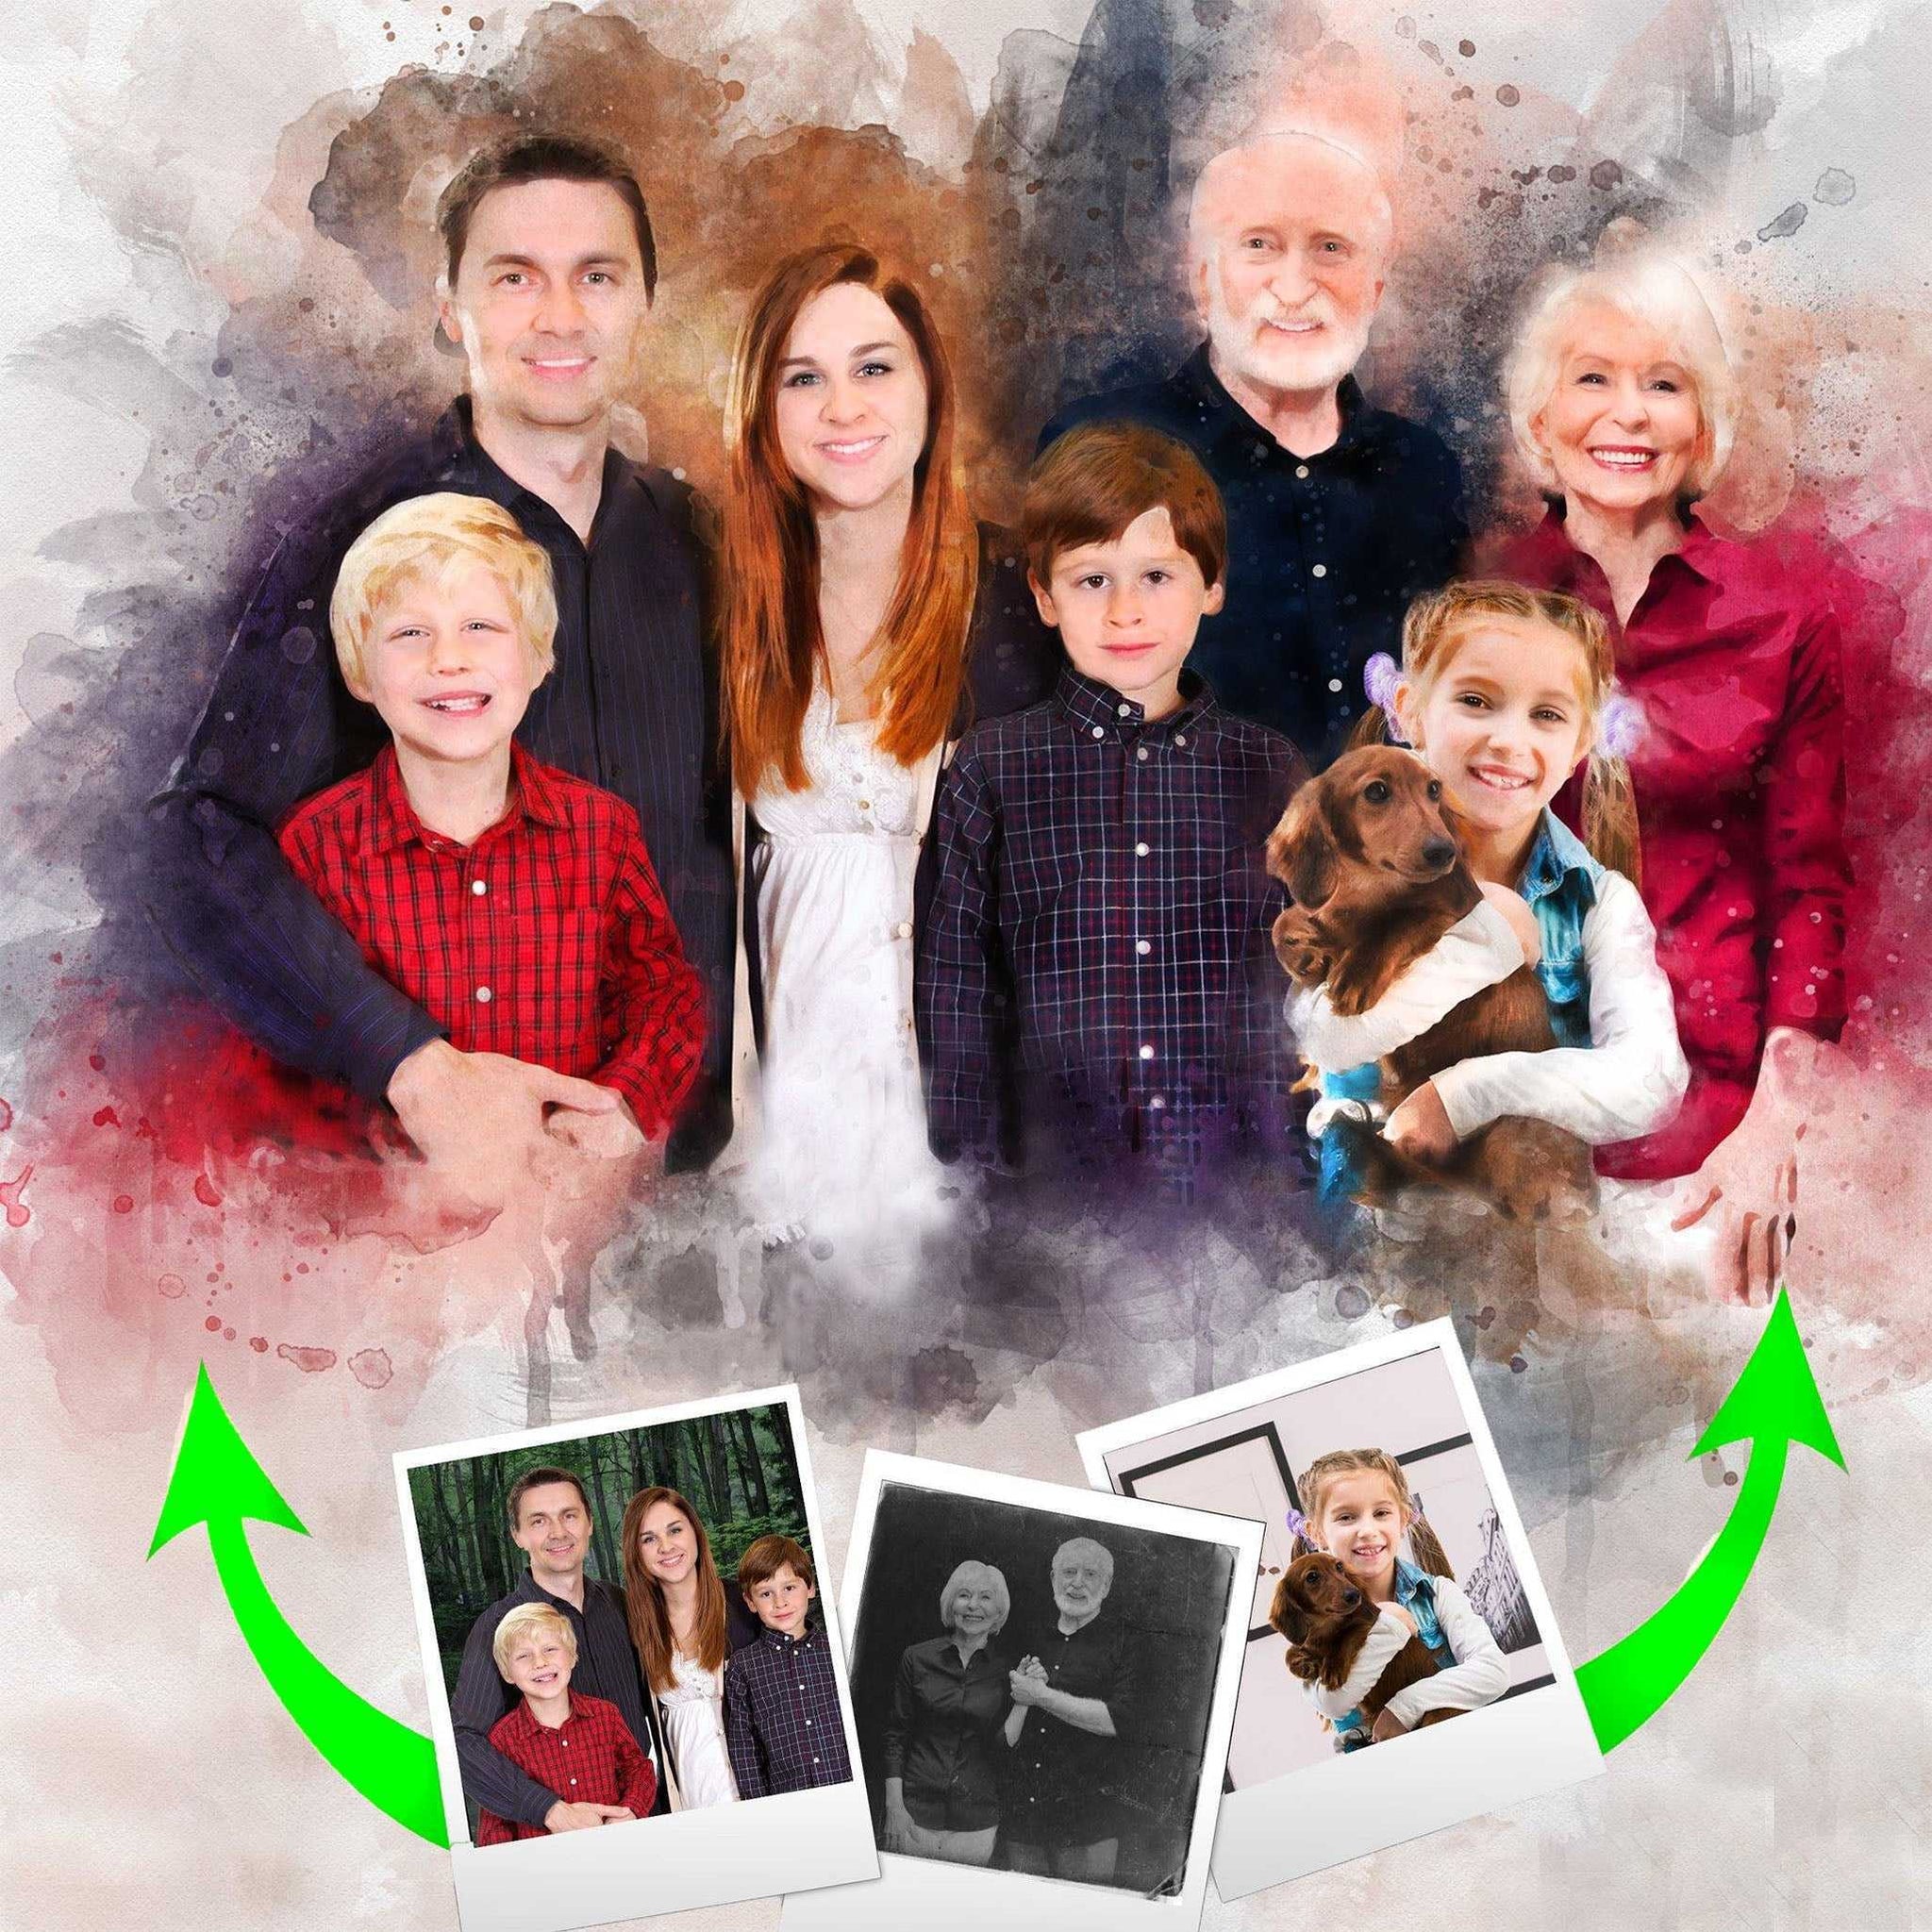 🌈 Combine Photos and Images | Merge Images to one Family Pictures with Deceased Loved One - FromPicToArt